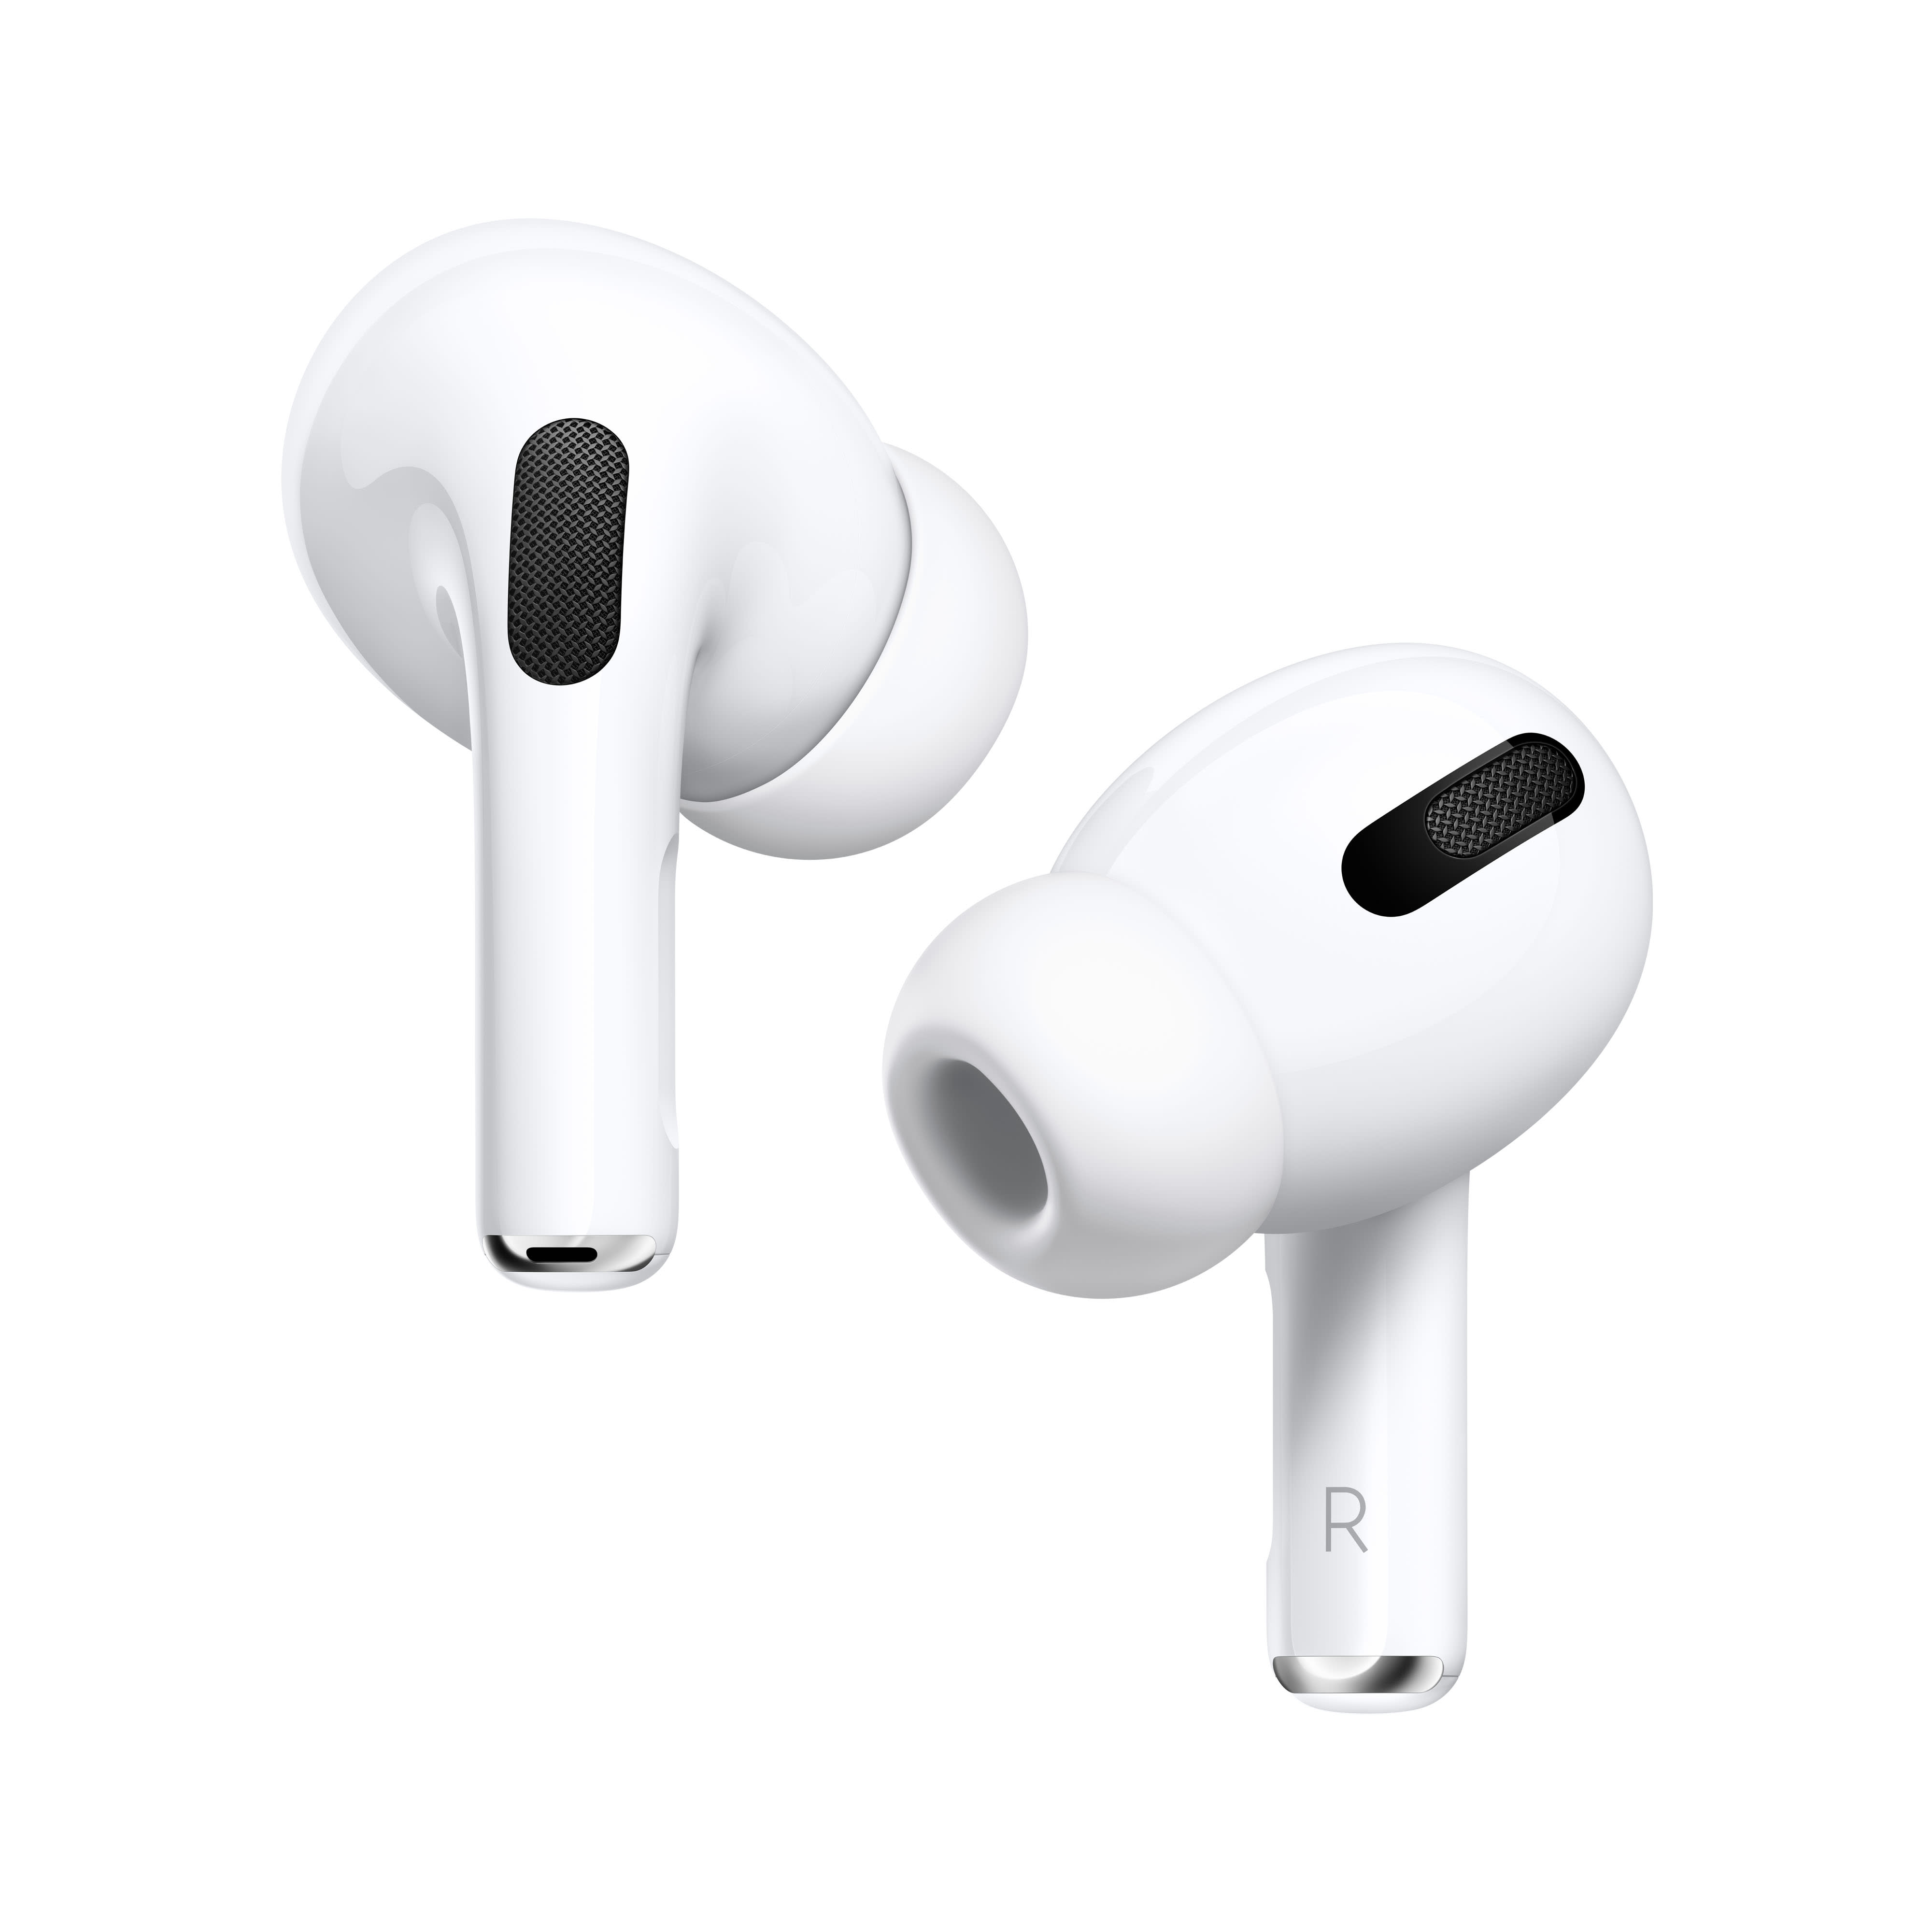 http://cdn.apartmenttherapy.info/image/upload/v1602460836/gen-workflow/product-database/apple-airpods-pro.jpg